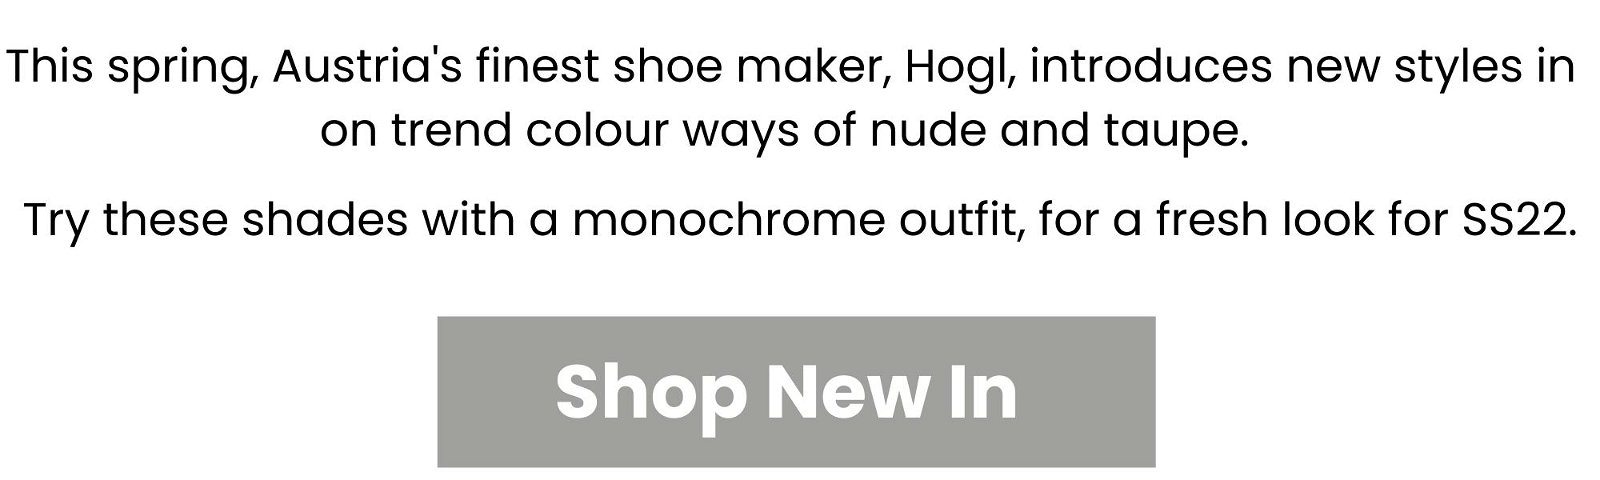 Hogl new in loafers, sneakers and court shoes